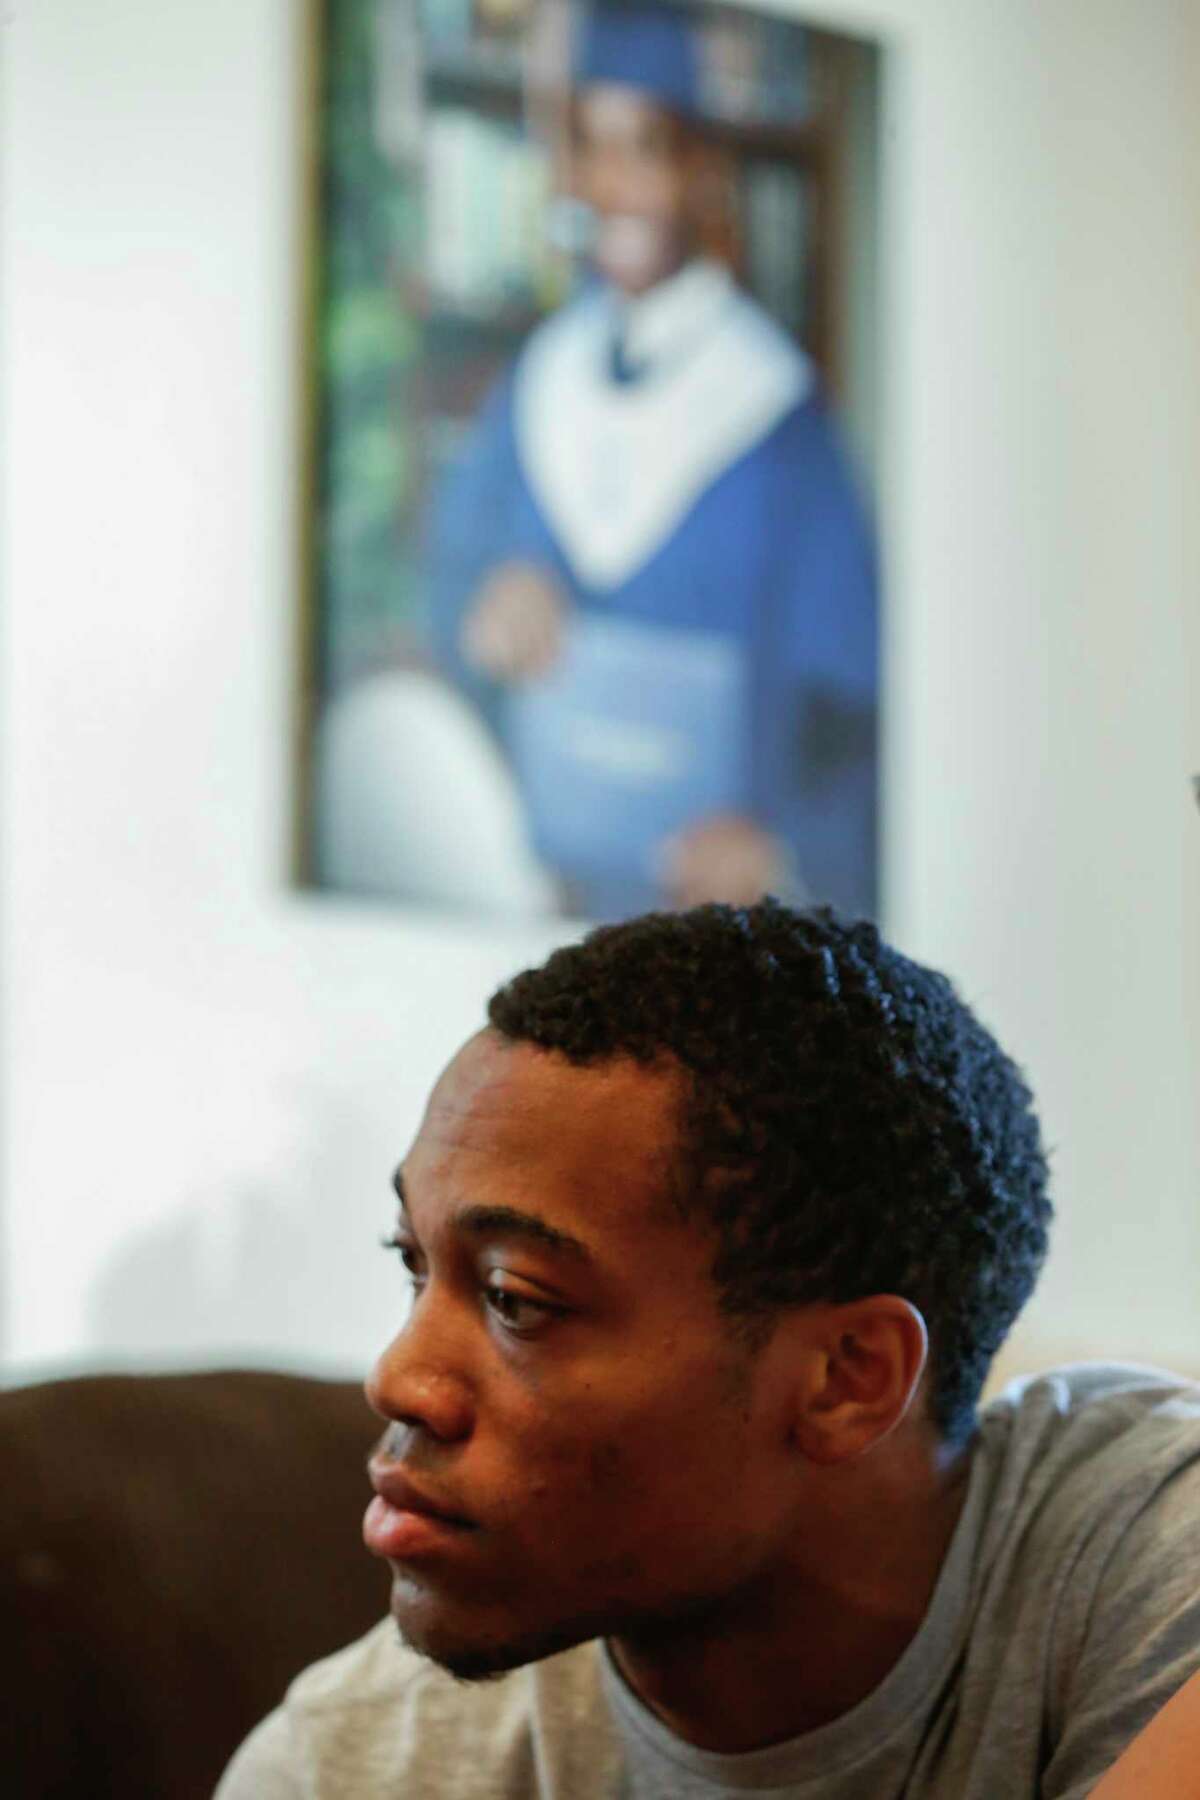 A'Vonta Williams listens to Harris County Sheriff Ed Gonzalez as he visits with him at his mother's home Thursday, November 30, 2017 in Houston. On August 30, a man driving a pickup truck shot at the car A'Vonta Williams was riding in, striking him in the legs and his girlfriend's diabetic grandmother in the bladder. Both were airlifted to the hospital. Thursday is three months since the incident and nobody from HCSO has interviewed the victims. A'Vonta, 21, was a security guard and aspiring boxer and state trooper who said responding deputies and constables didn't render aid and peppered him with questions about who he was beefing with and if he was a gang member. Williams was a high school law enforcement explorer who appears to have no criminal record. He can't work and his mother quit her job to care for him. They're most concerned about how the lack of aid intensified the injuries and that the case hasn't been thoroughly investigated, so a public shooter is still on the loose.